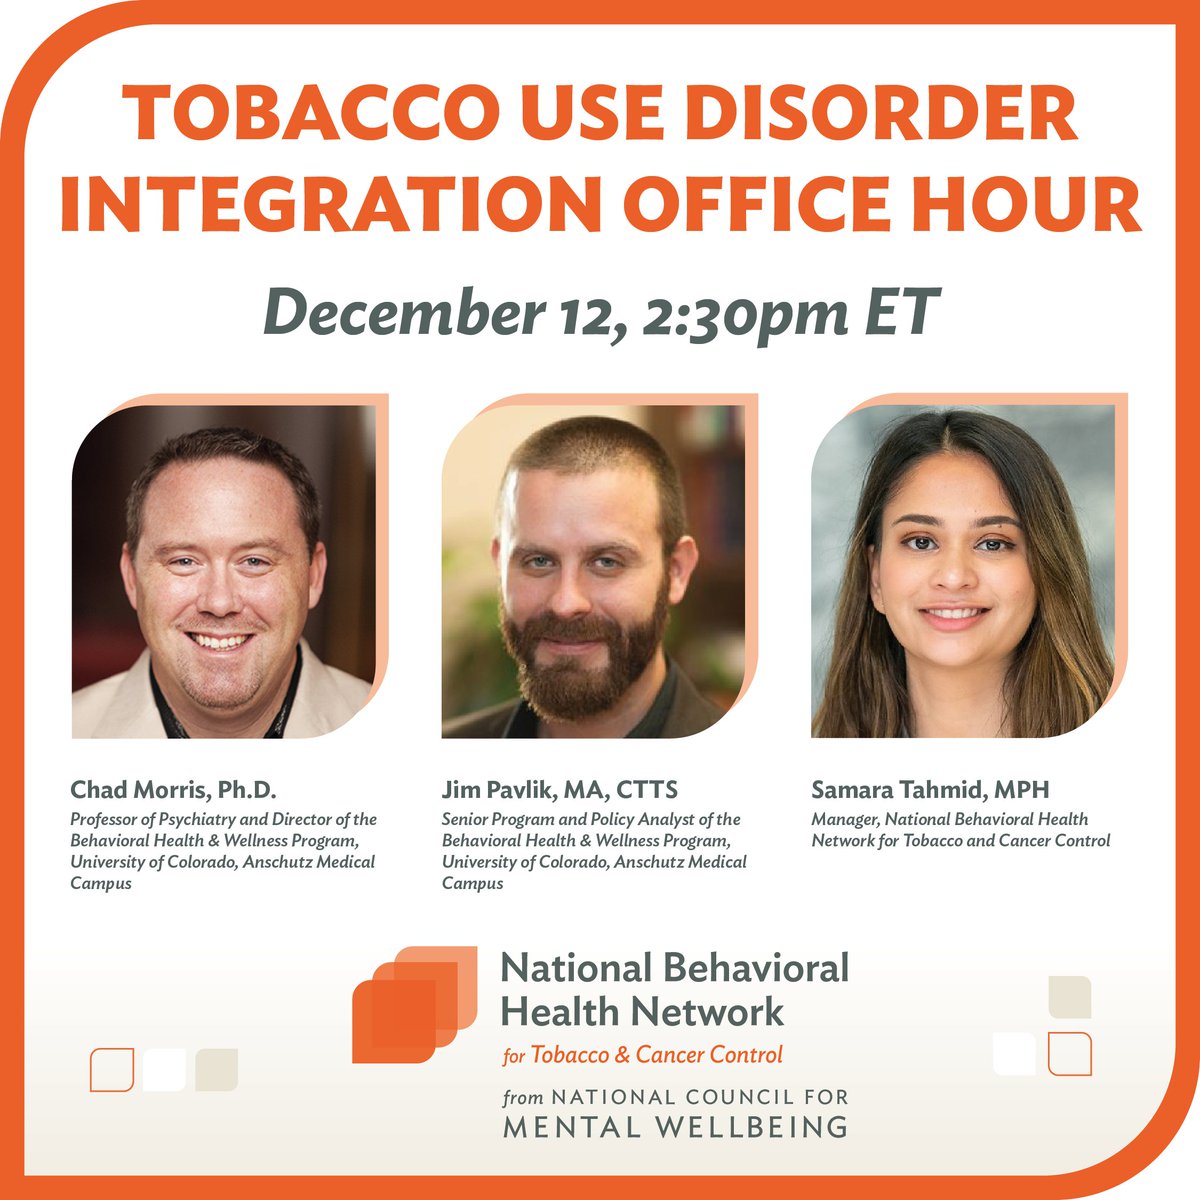 Tomorrow: Join experts to discuss how we can strengthen partnerships with mental health and substance use organizations to address tobacco-related disparities. Share insights and engage in peer-to-peer learning at this free event: bit.ly/48fcVED